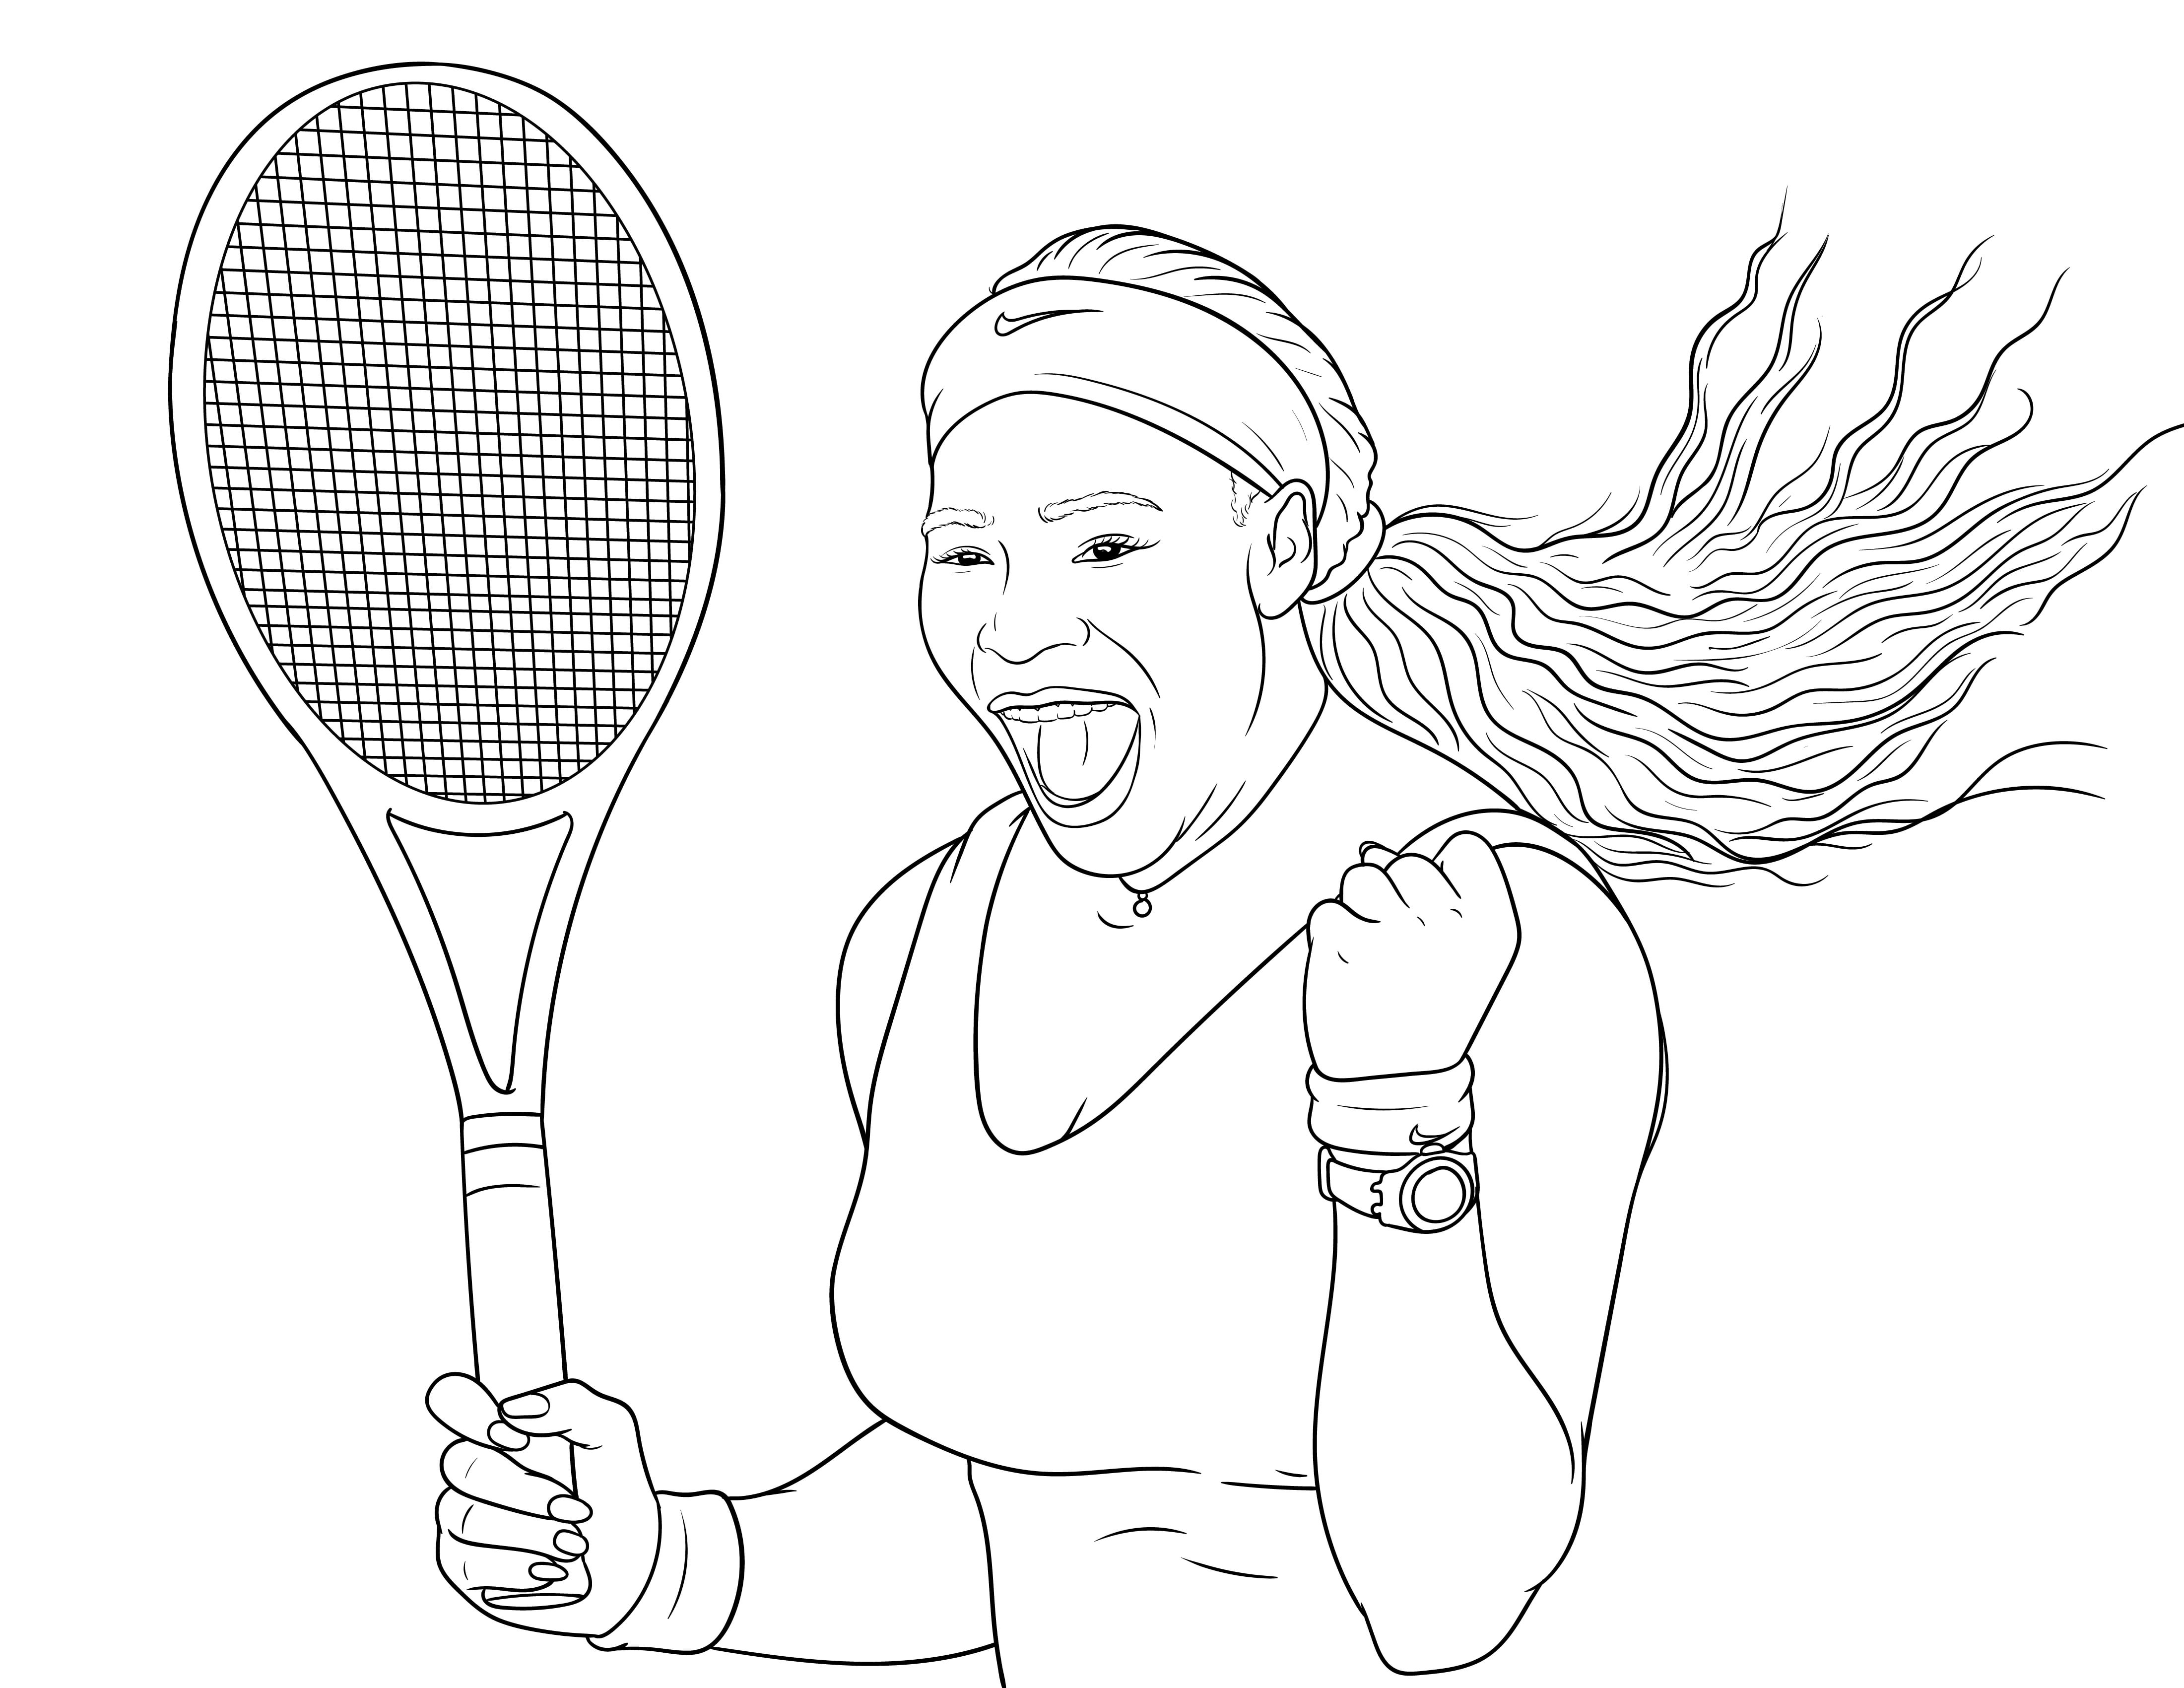 Serena williams coloring page for the tennis fans out there